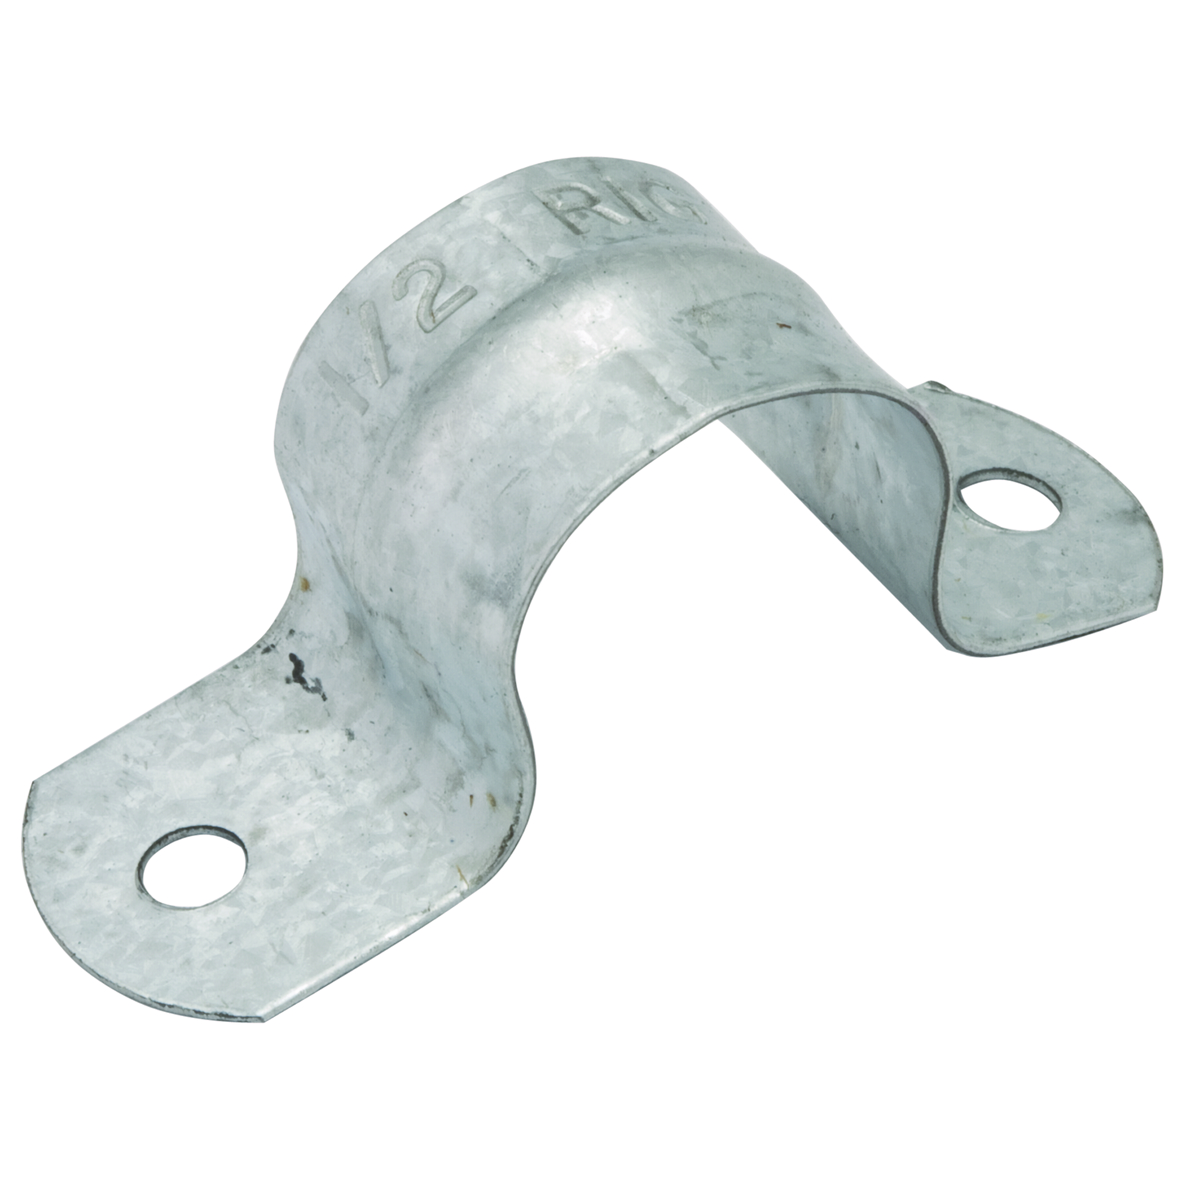 Two Hole Straps Stamped Steel, 3/4 In. Trade Size RGD/IMC/FLEX 2-HOLE 3/4 IN